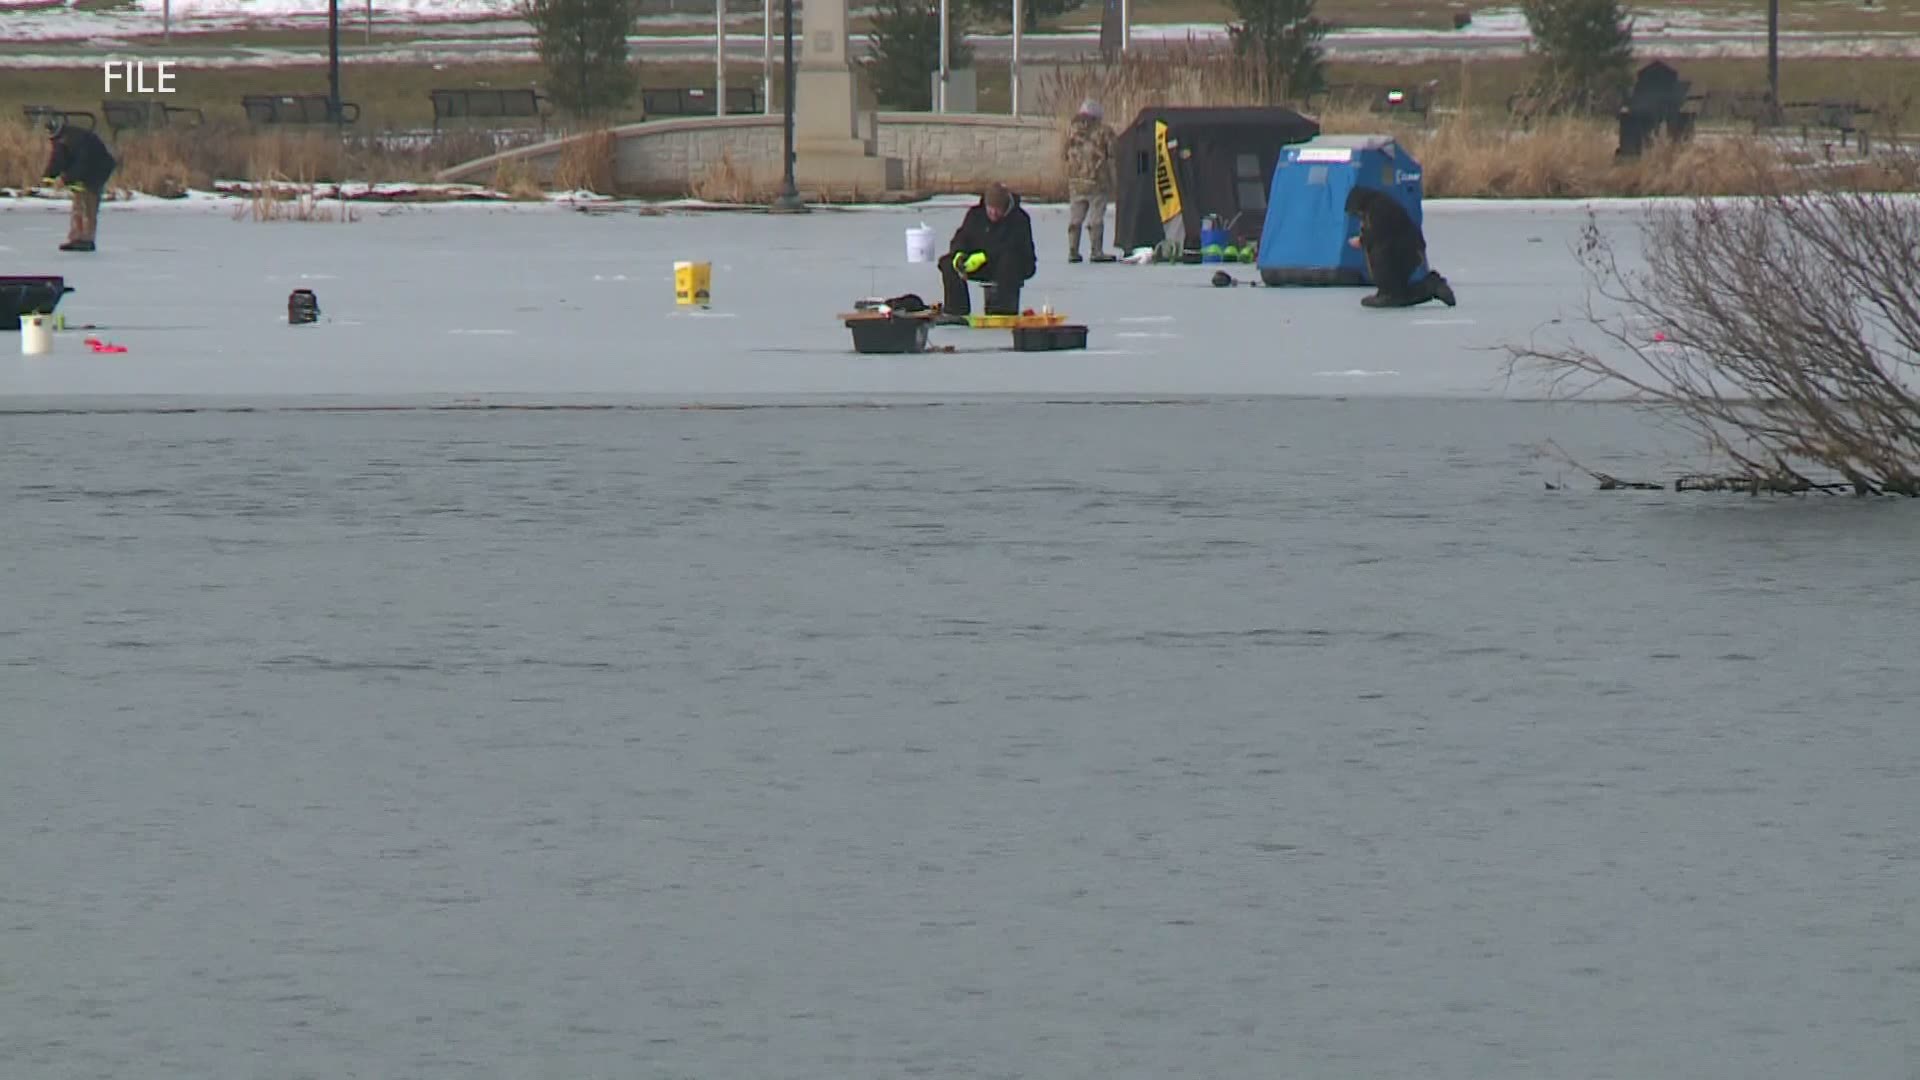 The date to remove an ice shanty from lakes in Kent, Ottawa and Muskegon counties is midnight March 1.